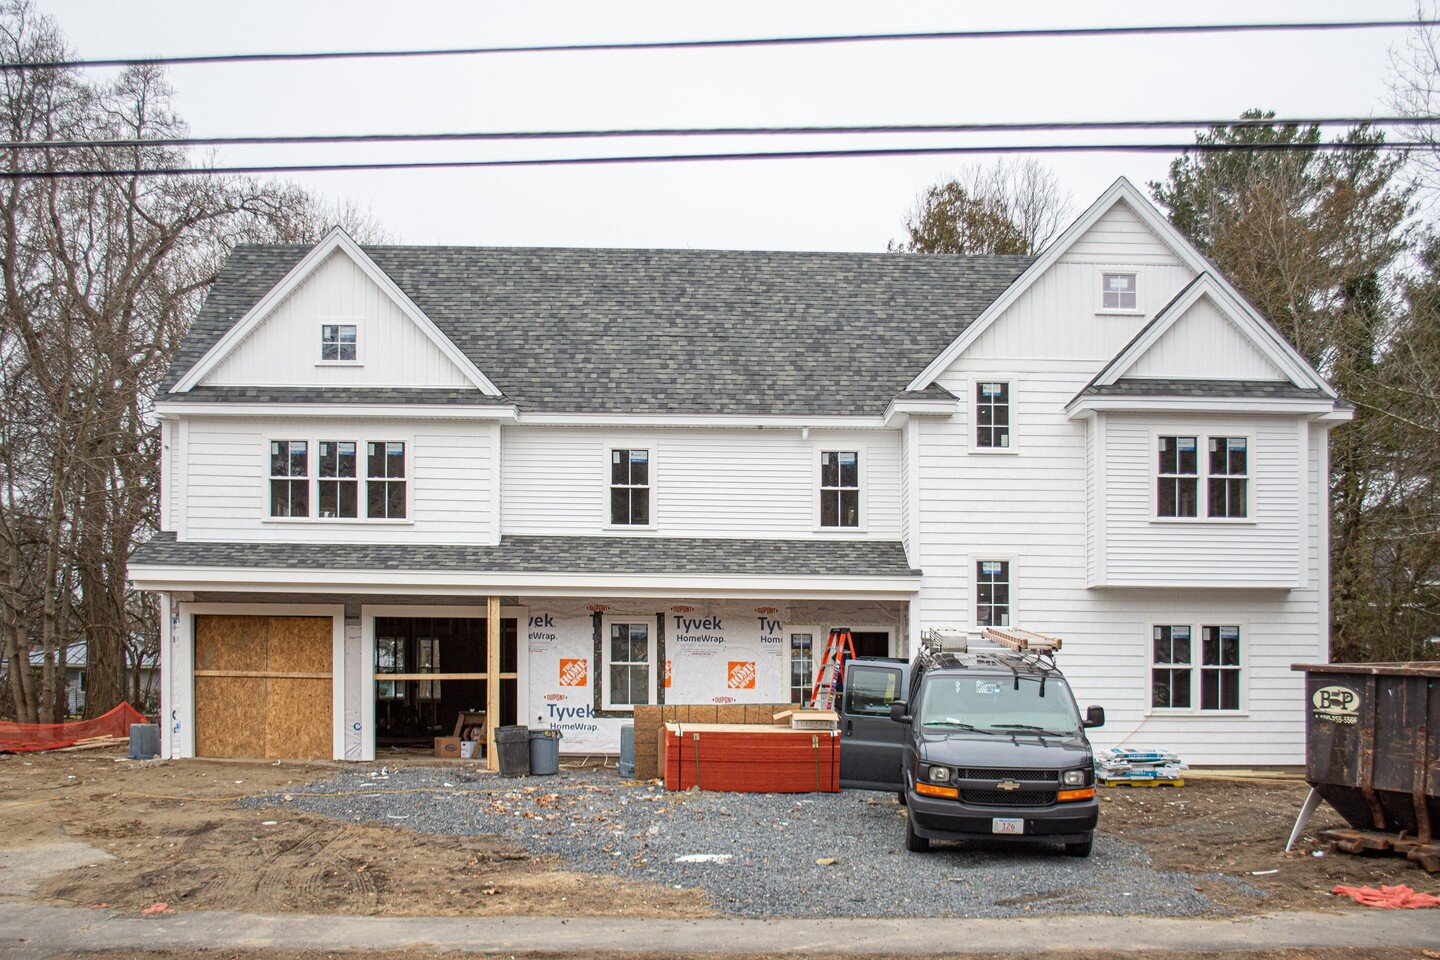 7 Hemlock is starting to shape up! //

This 4 Bed, 3.5 Bath complete renovation will look very similar this builders recently sold Natick homes at 7 Stanley St and 14 Wentworth Rd. 7 Hemlock boasts over 3700 sqft of living space, and about 4250 sqft.